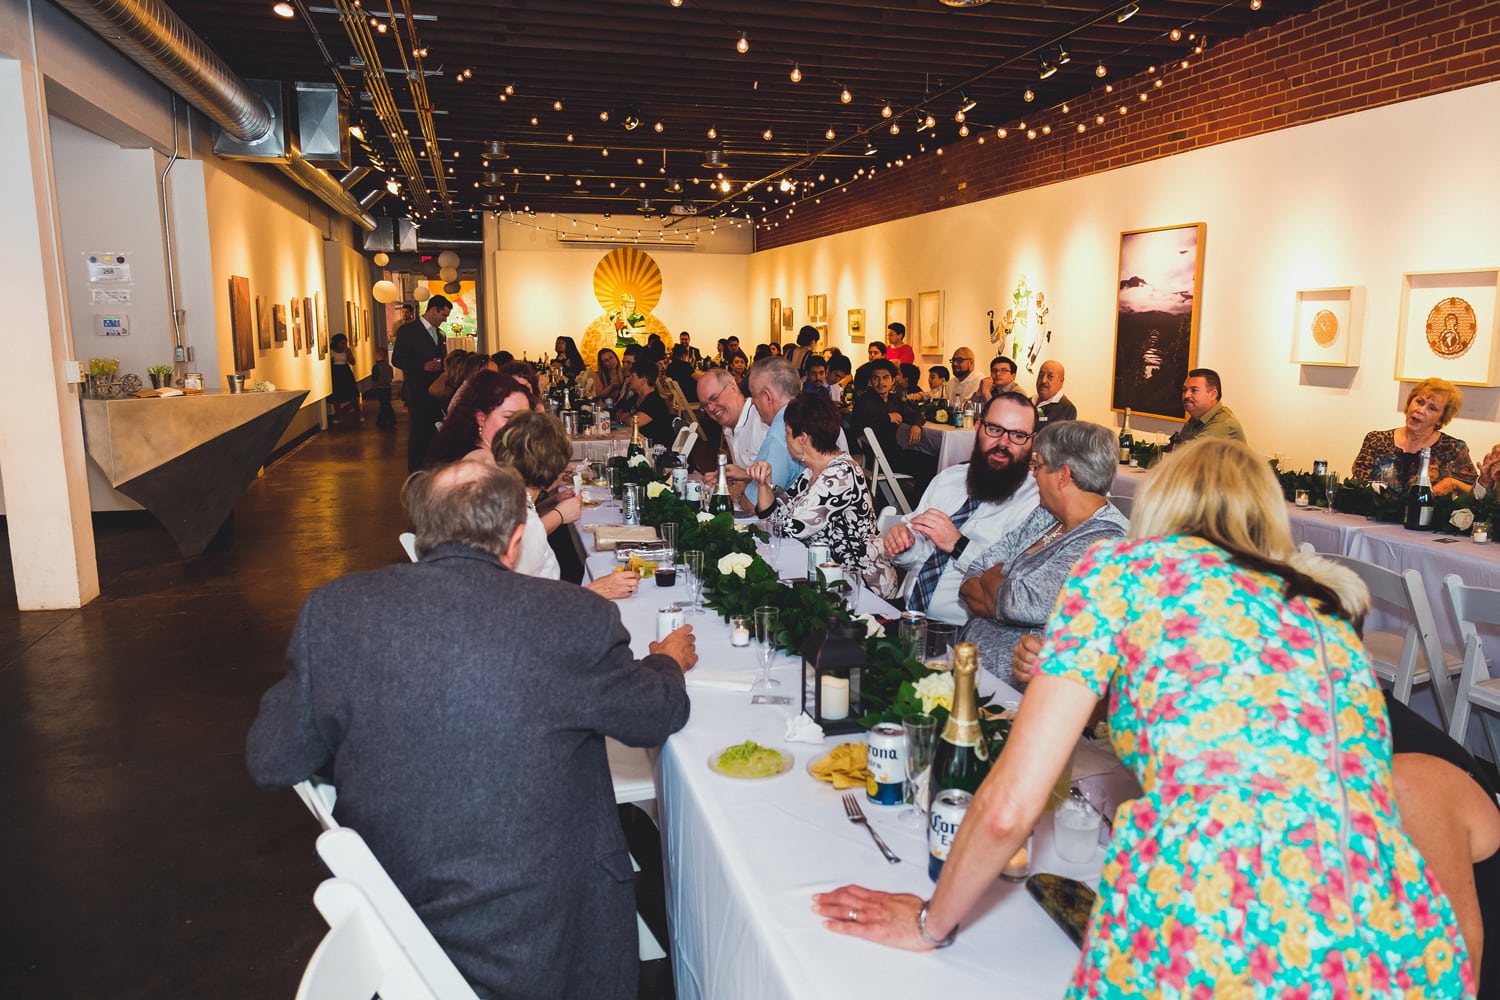 John Moore and Isabel Orozco Moore wedding at IAO Gallery in Oklahoma City // Photo by Leia Smethurst Photography